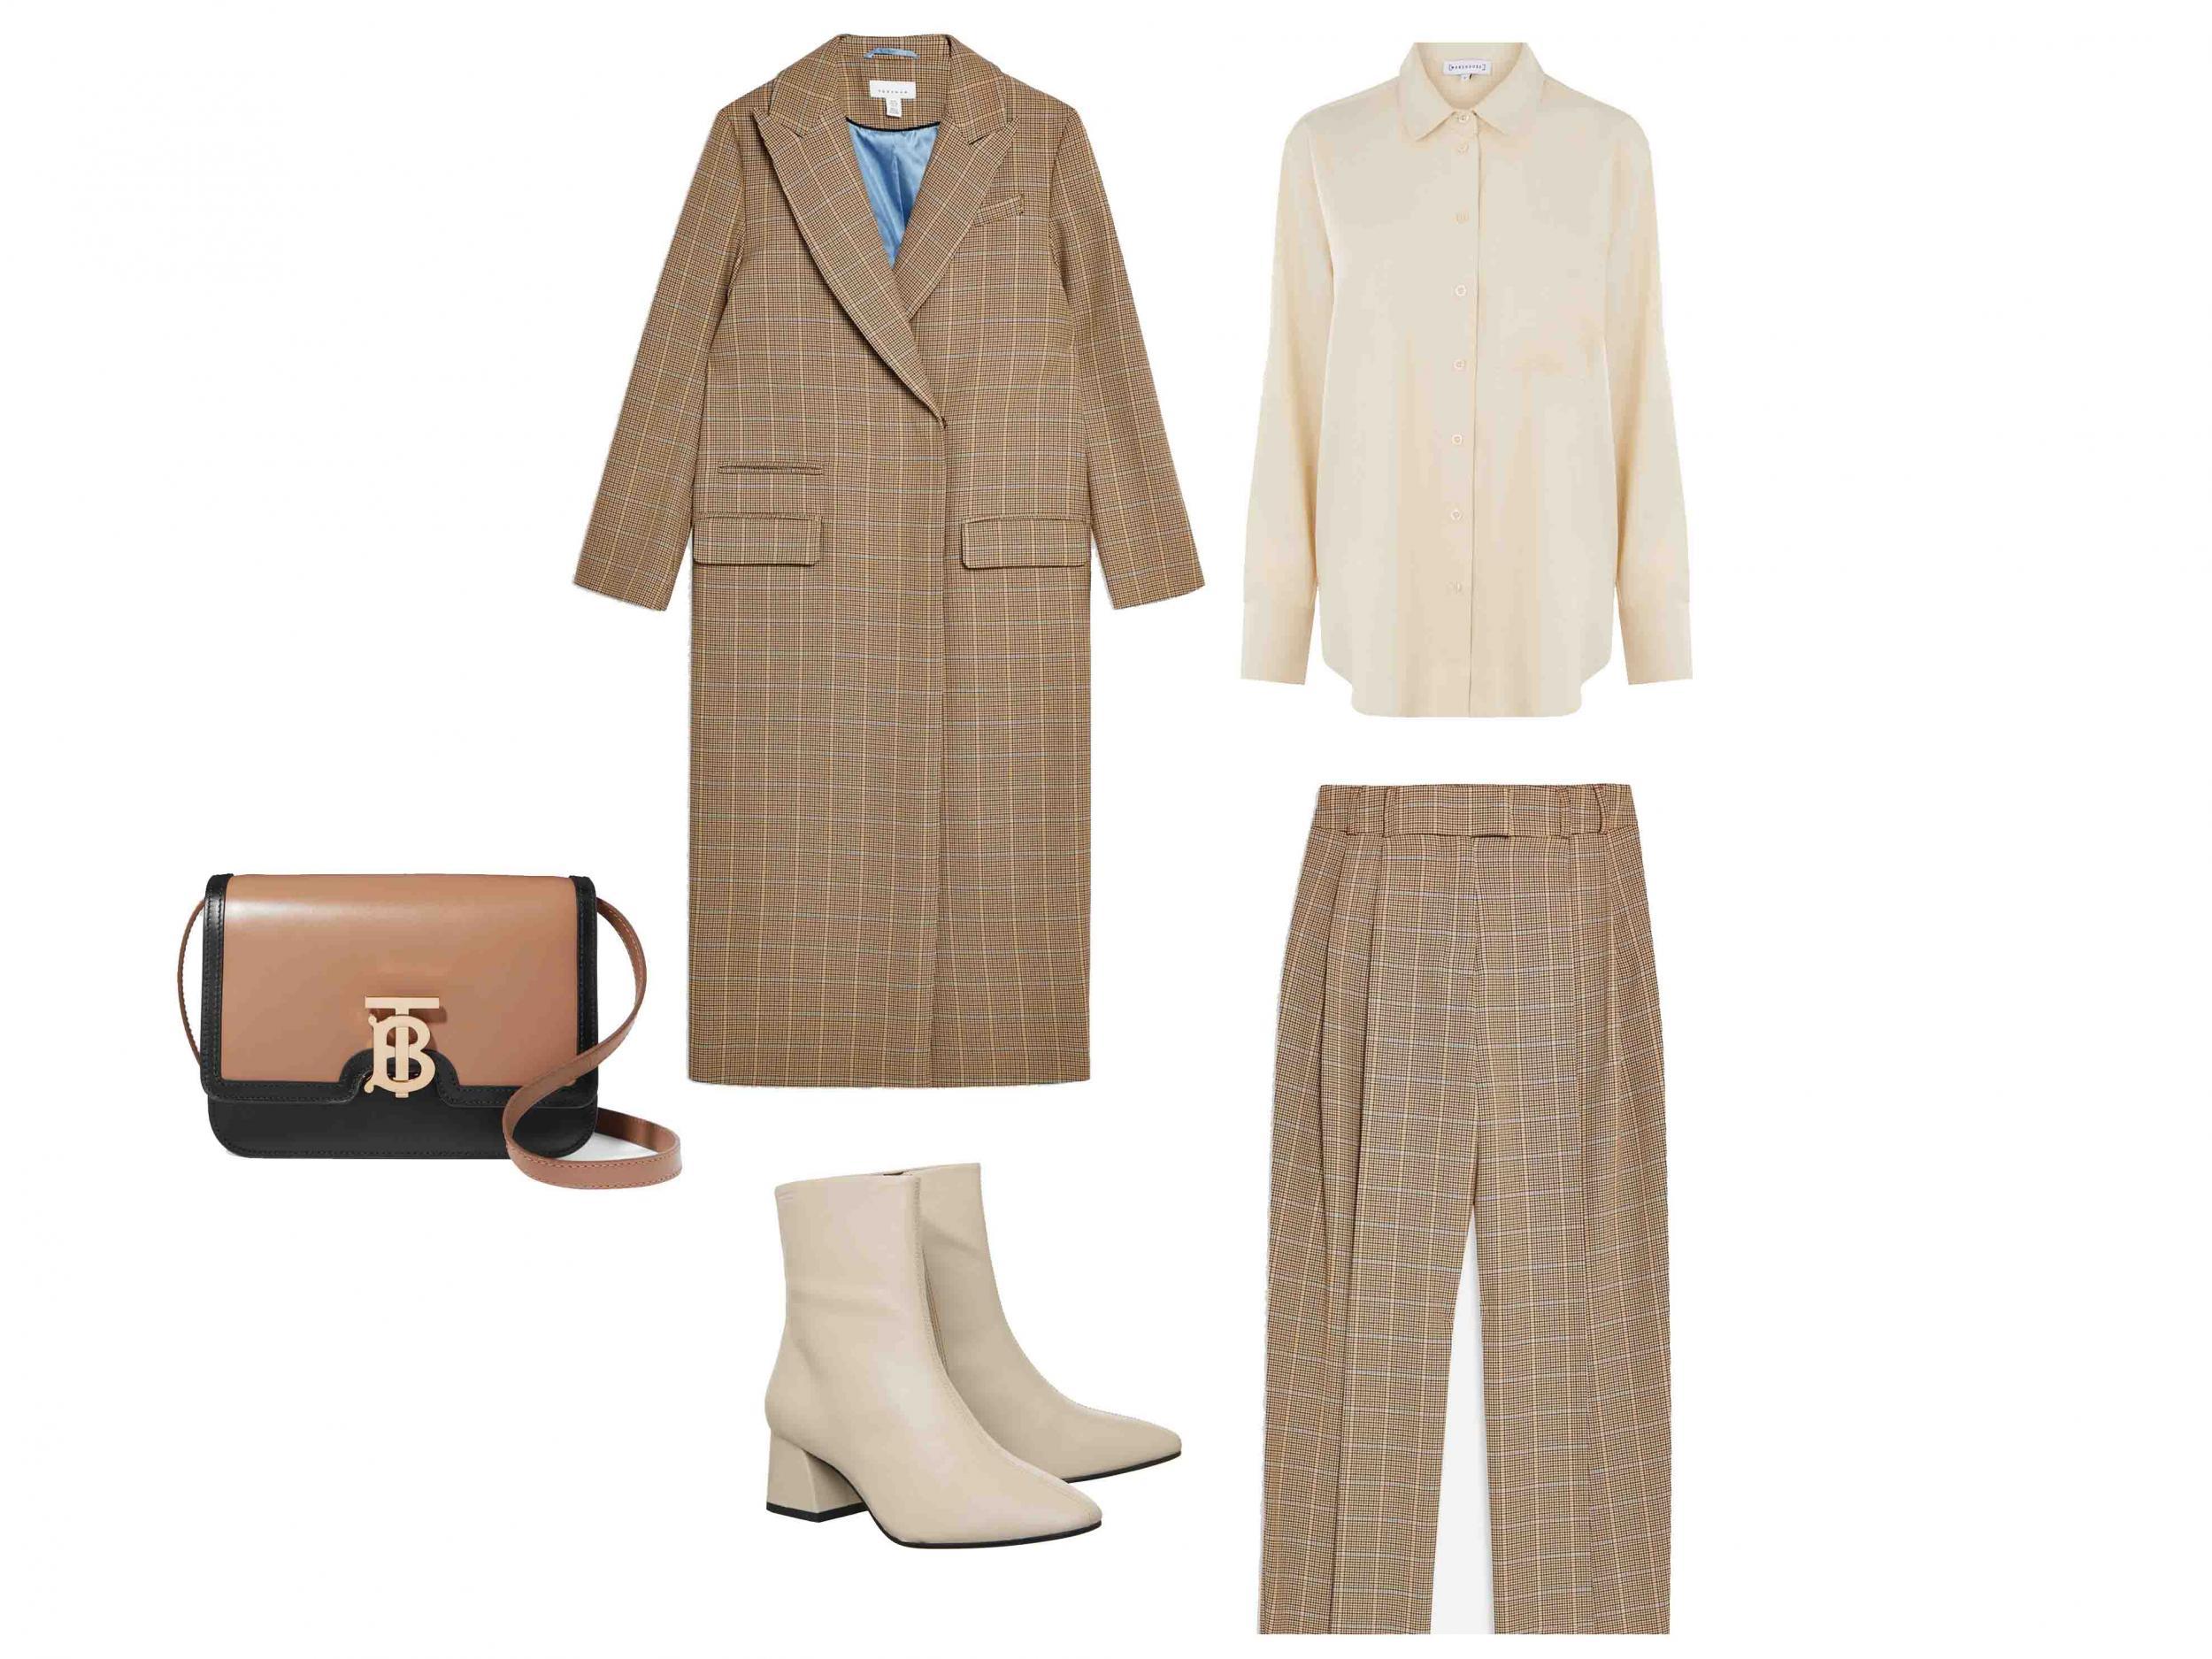 Burberry, TB Two-Tone Leather Shoulder Bag, £1,590, Net-a-Porter; Tailored Check Coat, £85, Topshop; Oversized Utility Shirt, £32, Warehouse; Vagabond, Alice Block Heel Boots, £99.99, Office; Check Wide Leg Trousers, £29, Topshop